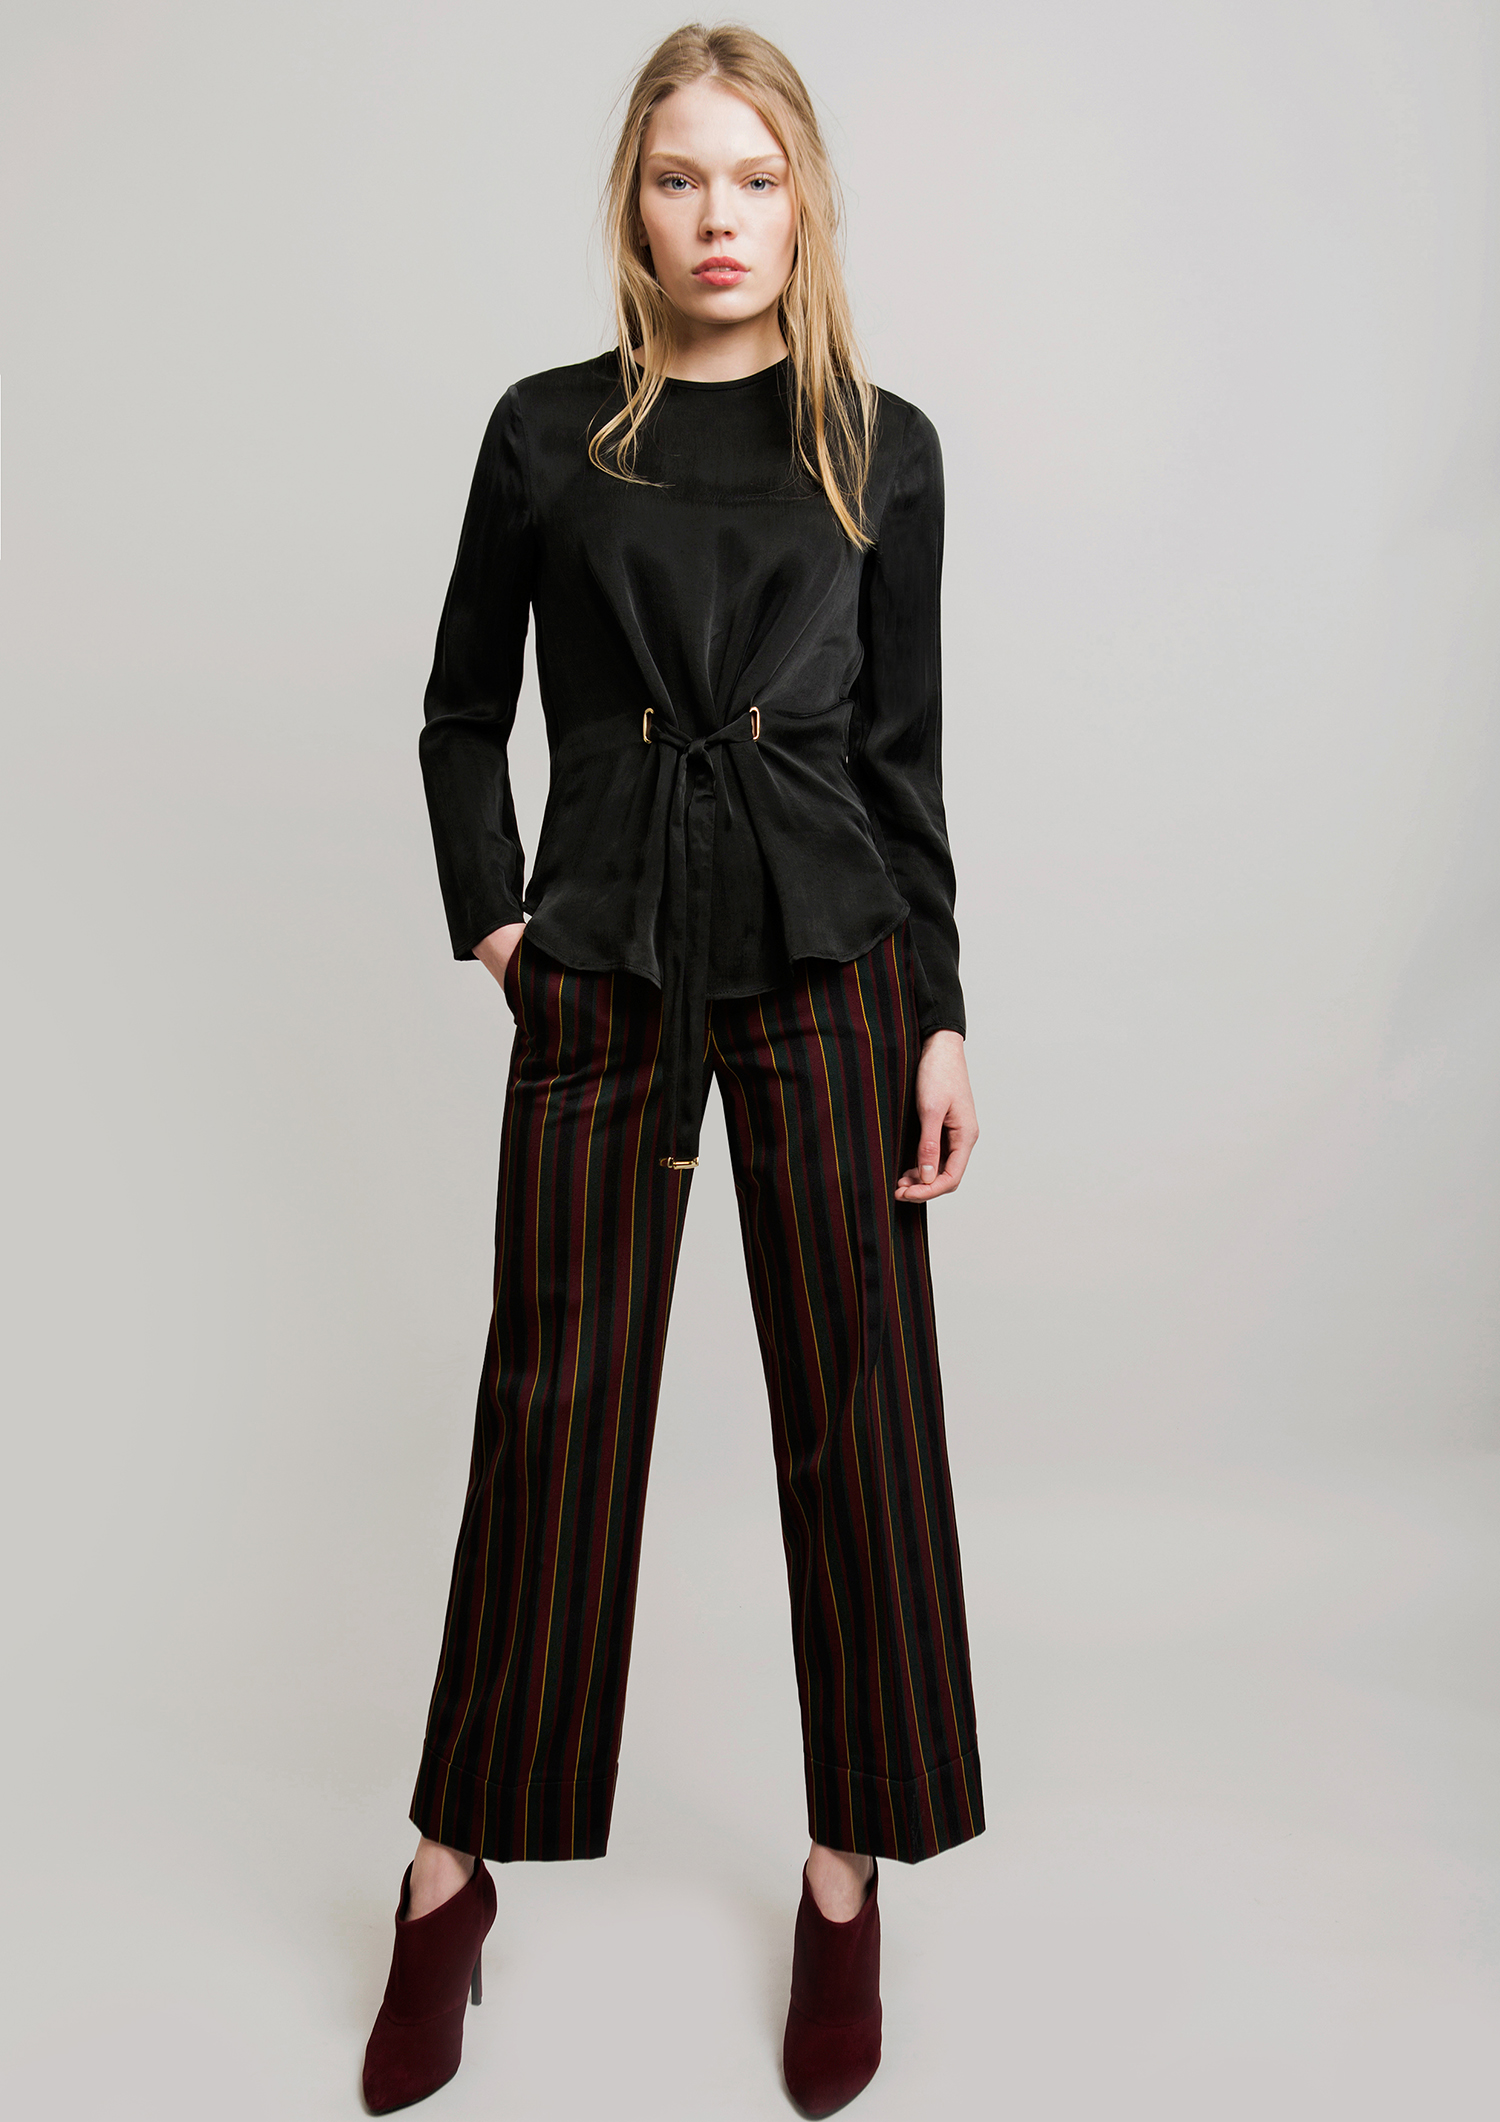 Military stripe trousers.